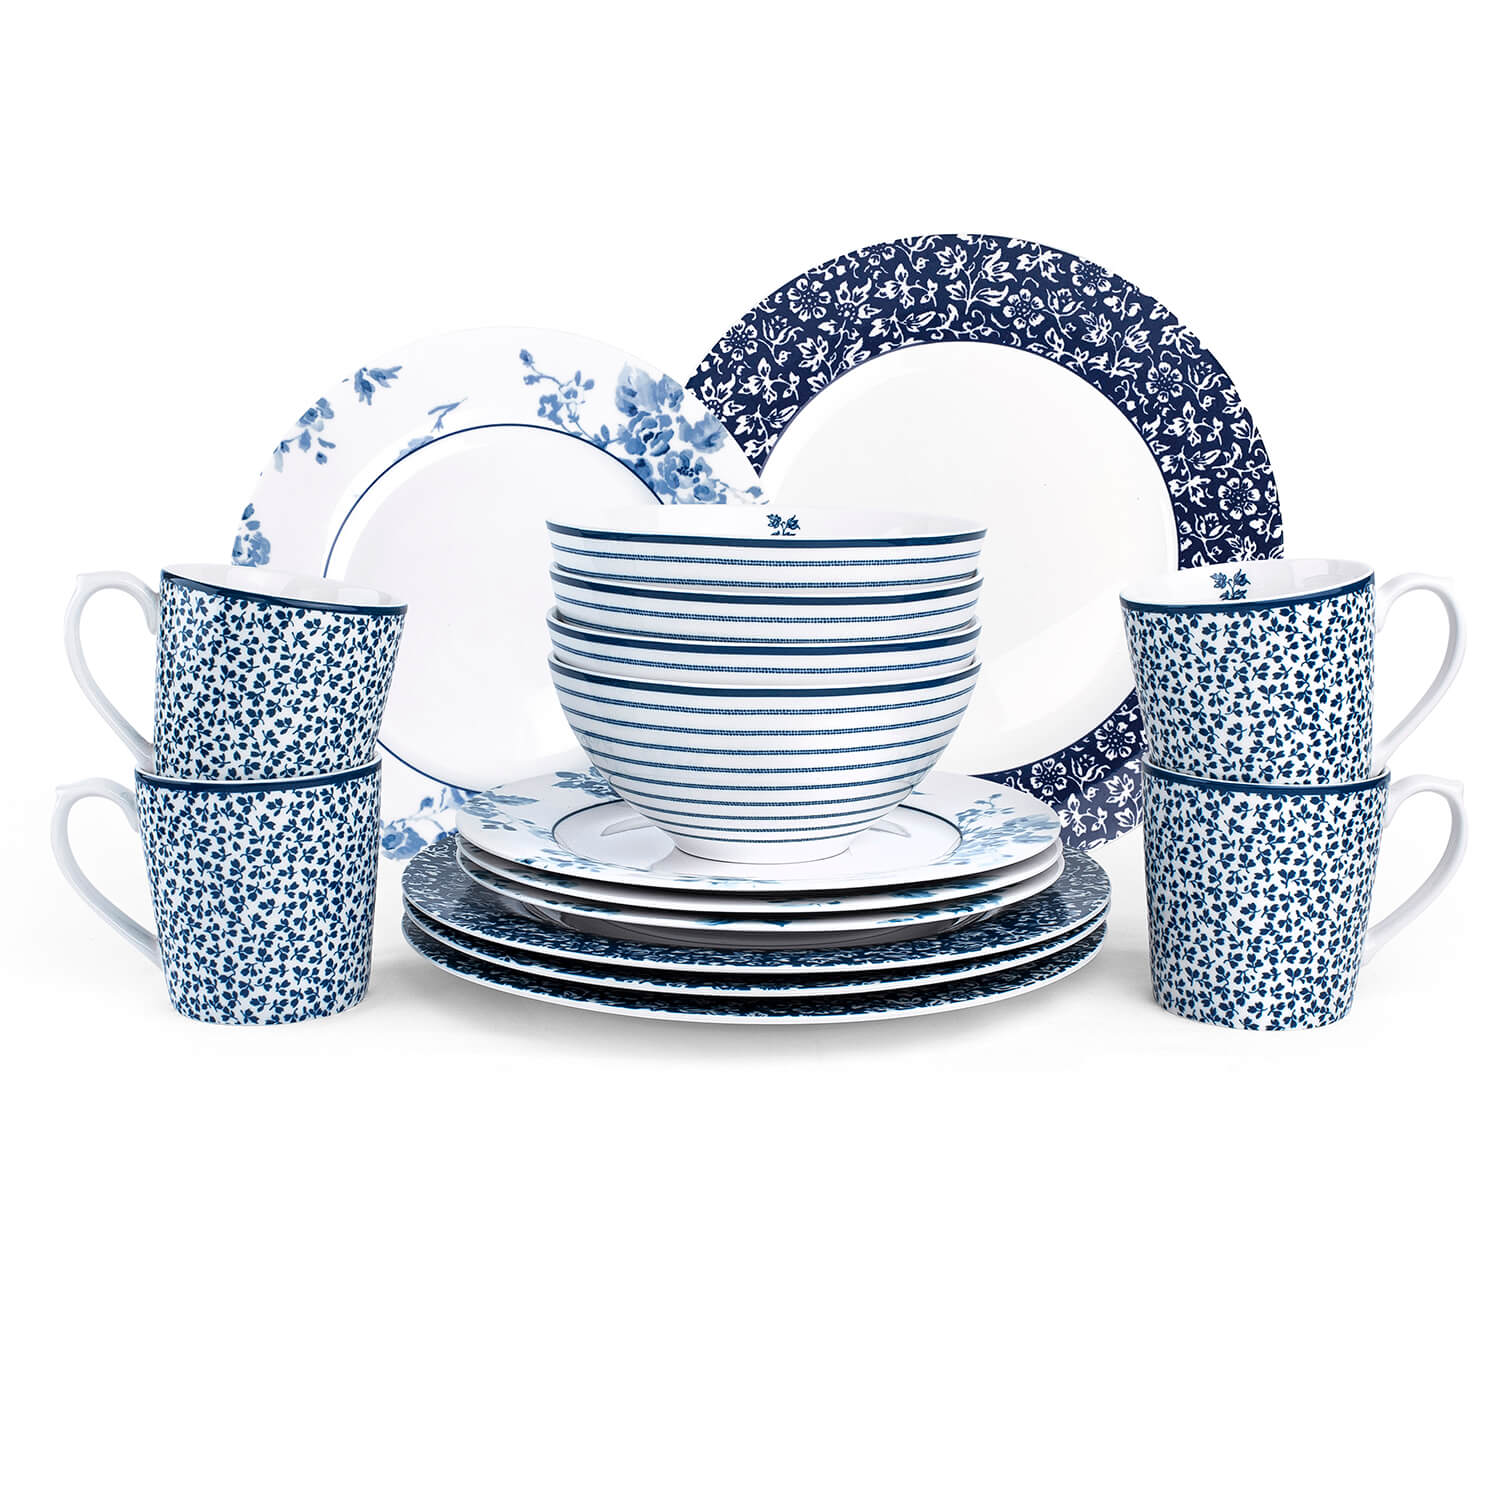 Laura Ashley Blueprint Collectables 16-Piece Tableware Giftset 2 Shaws Department Stores